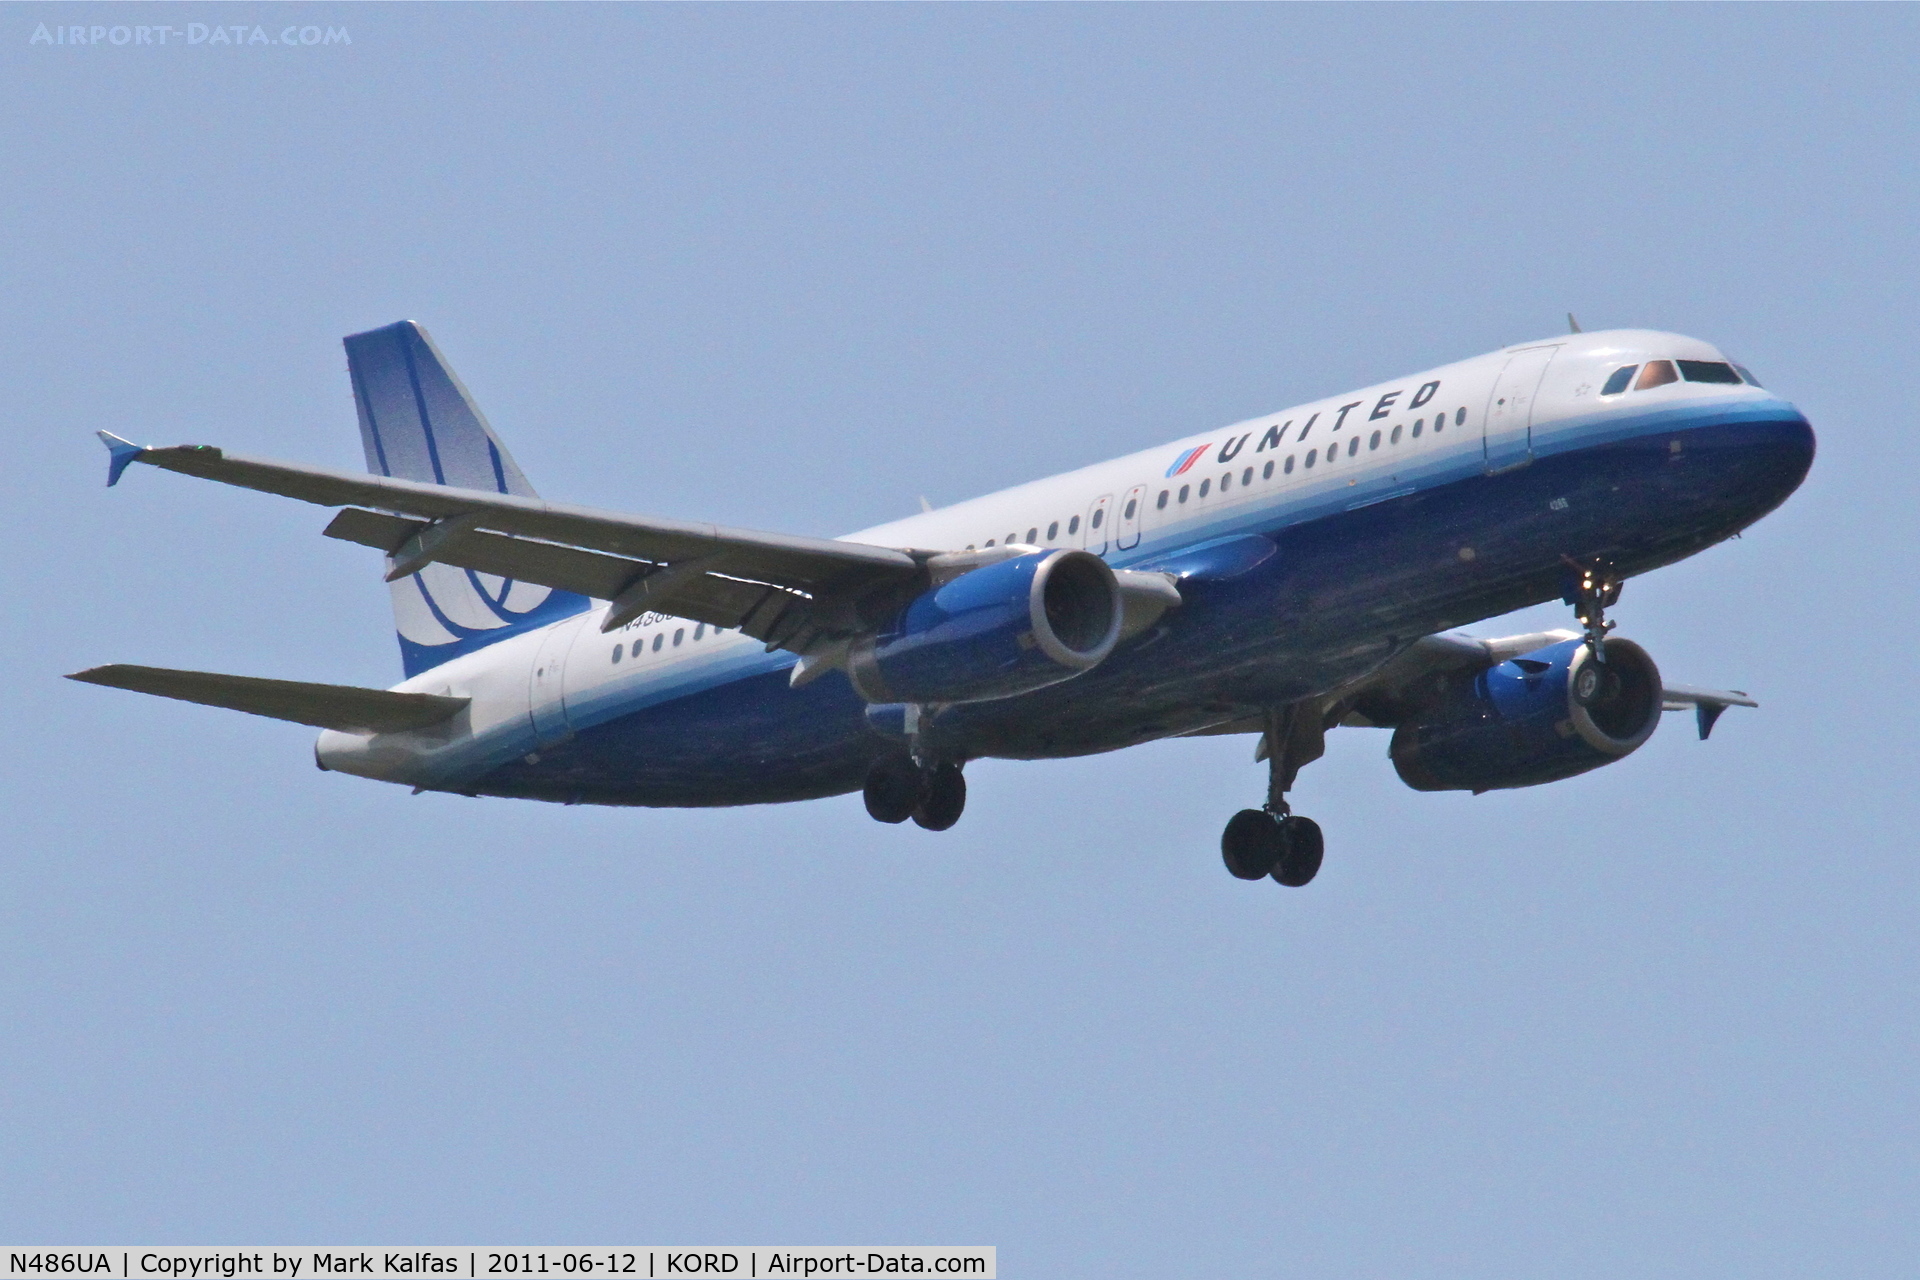 N486UA, 2001 Airbus A320-232 C/N 1620, United Airlines Airbus A320-232, UAL690 arriving from KSFO, RWY 10 approach KORD.